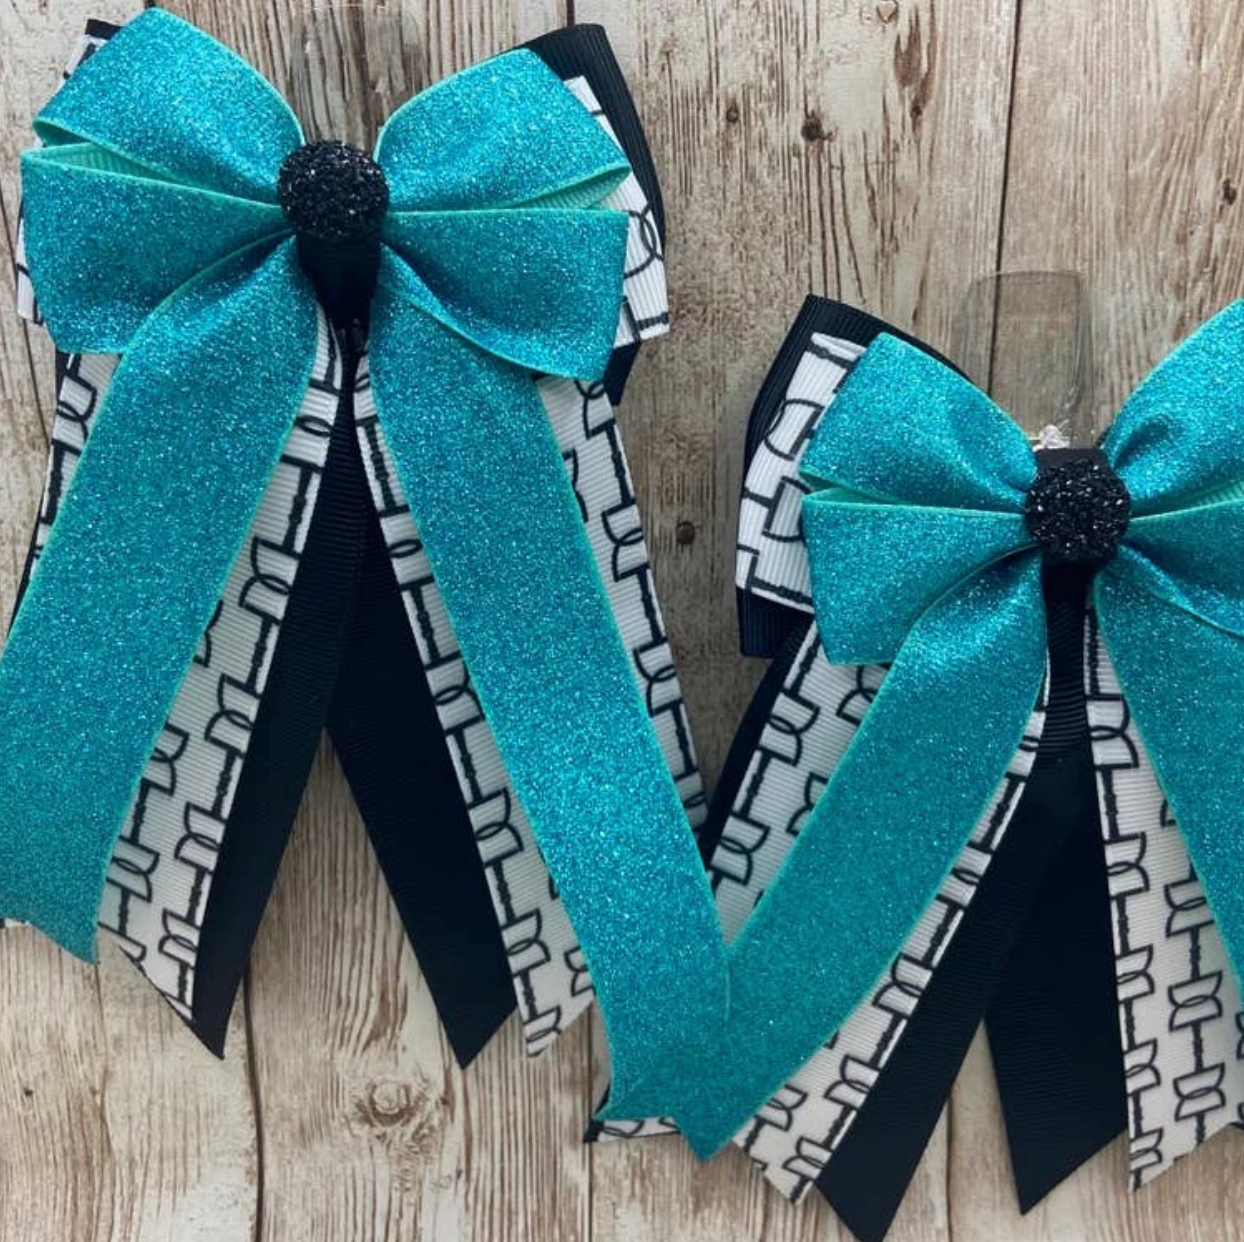 Benny Bows - Teal Glitter with Black and White Bits